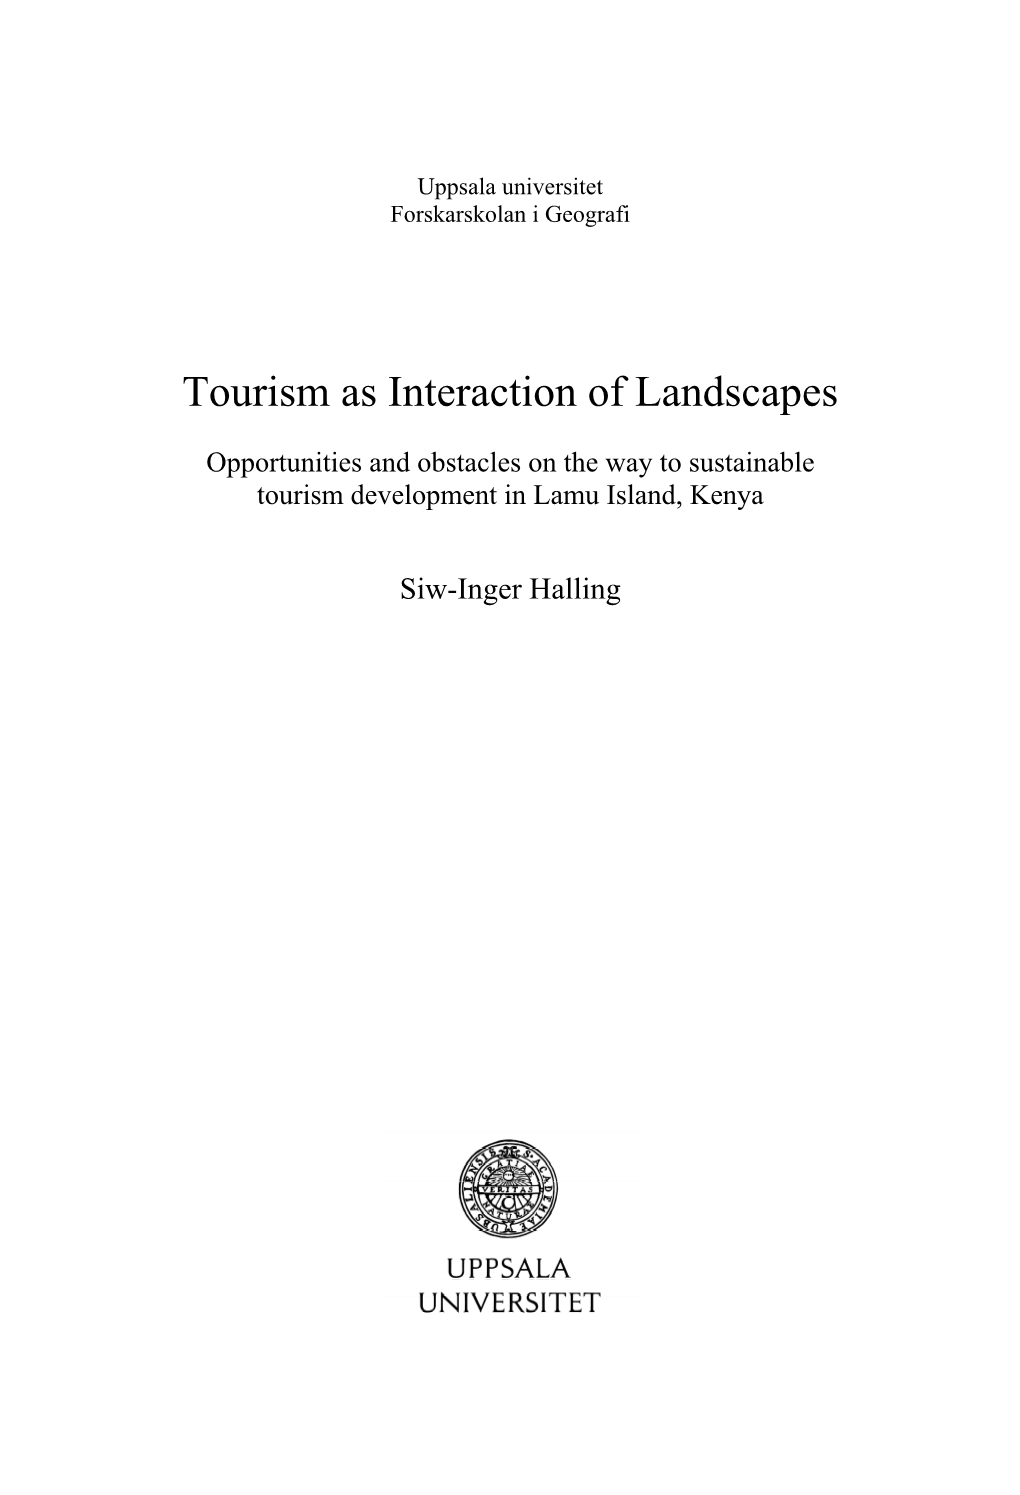 Tourism As Interaction of Landscapes